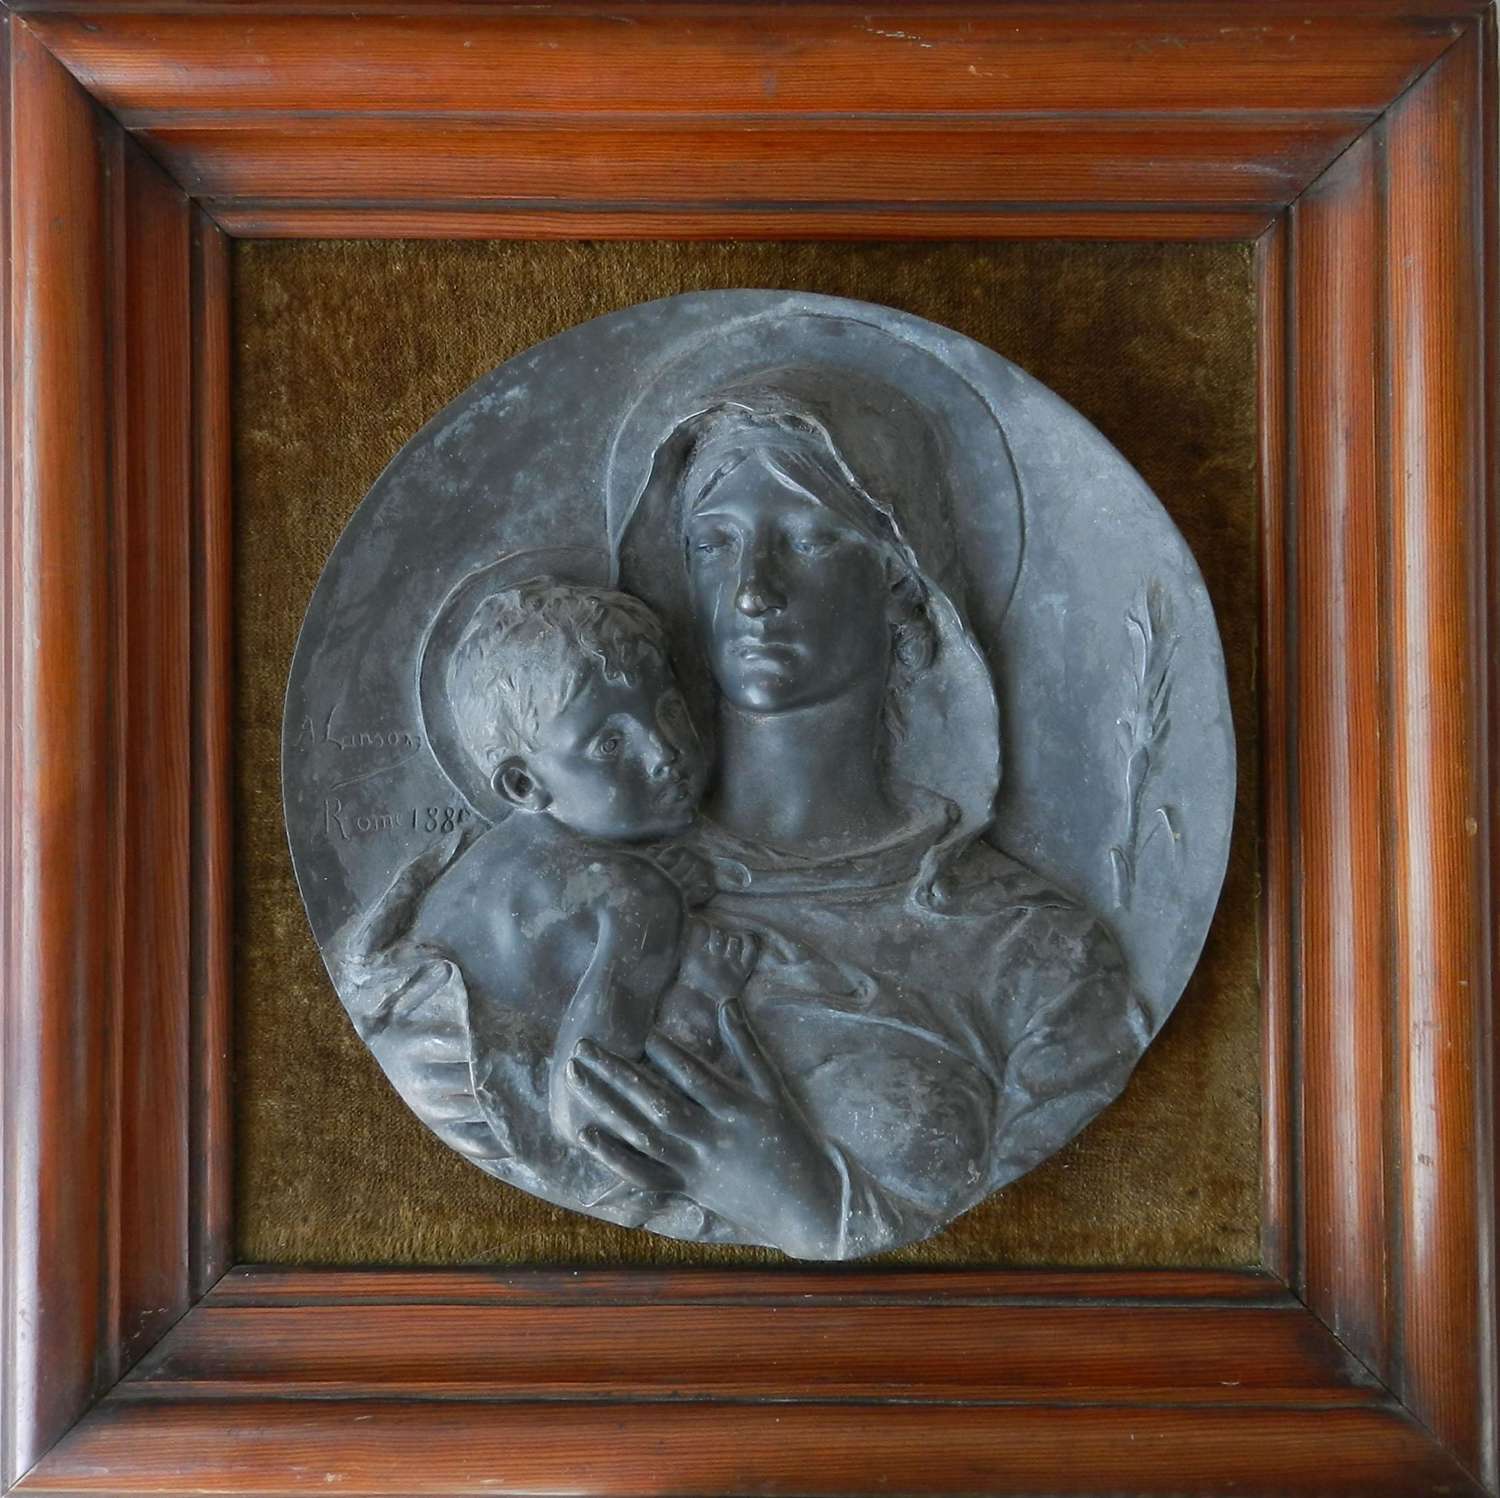 Madonna and Child 19th Century Pewter Sculpture after A Lanson c1881 Mary Jesus